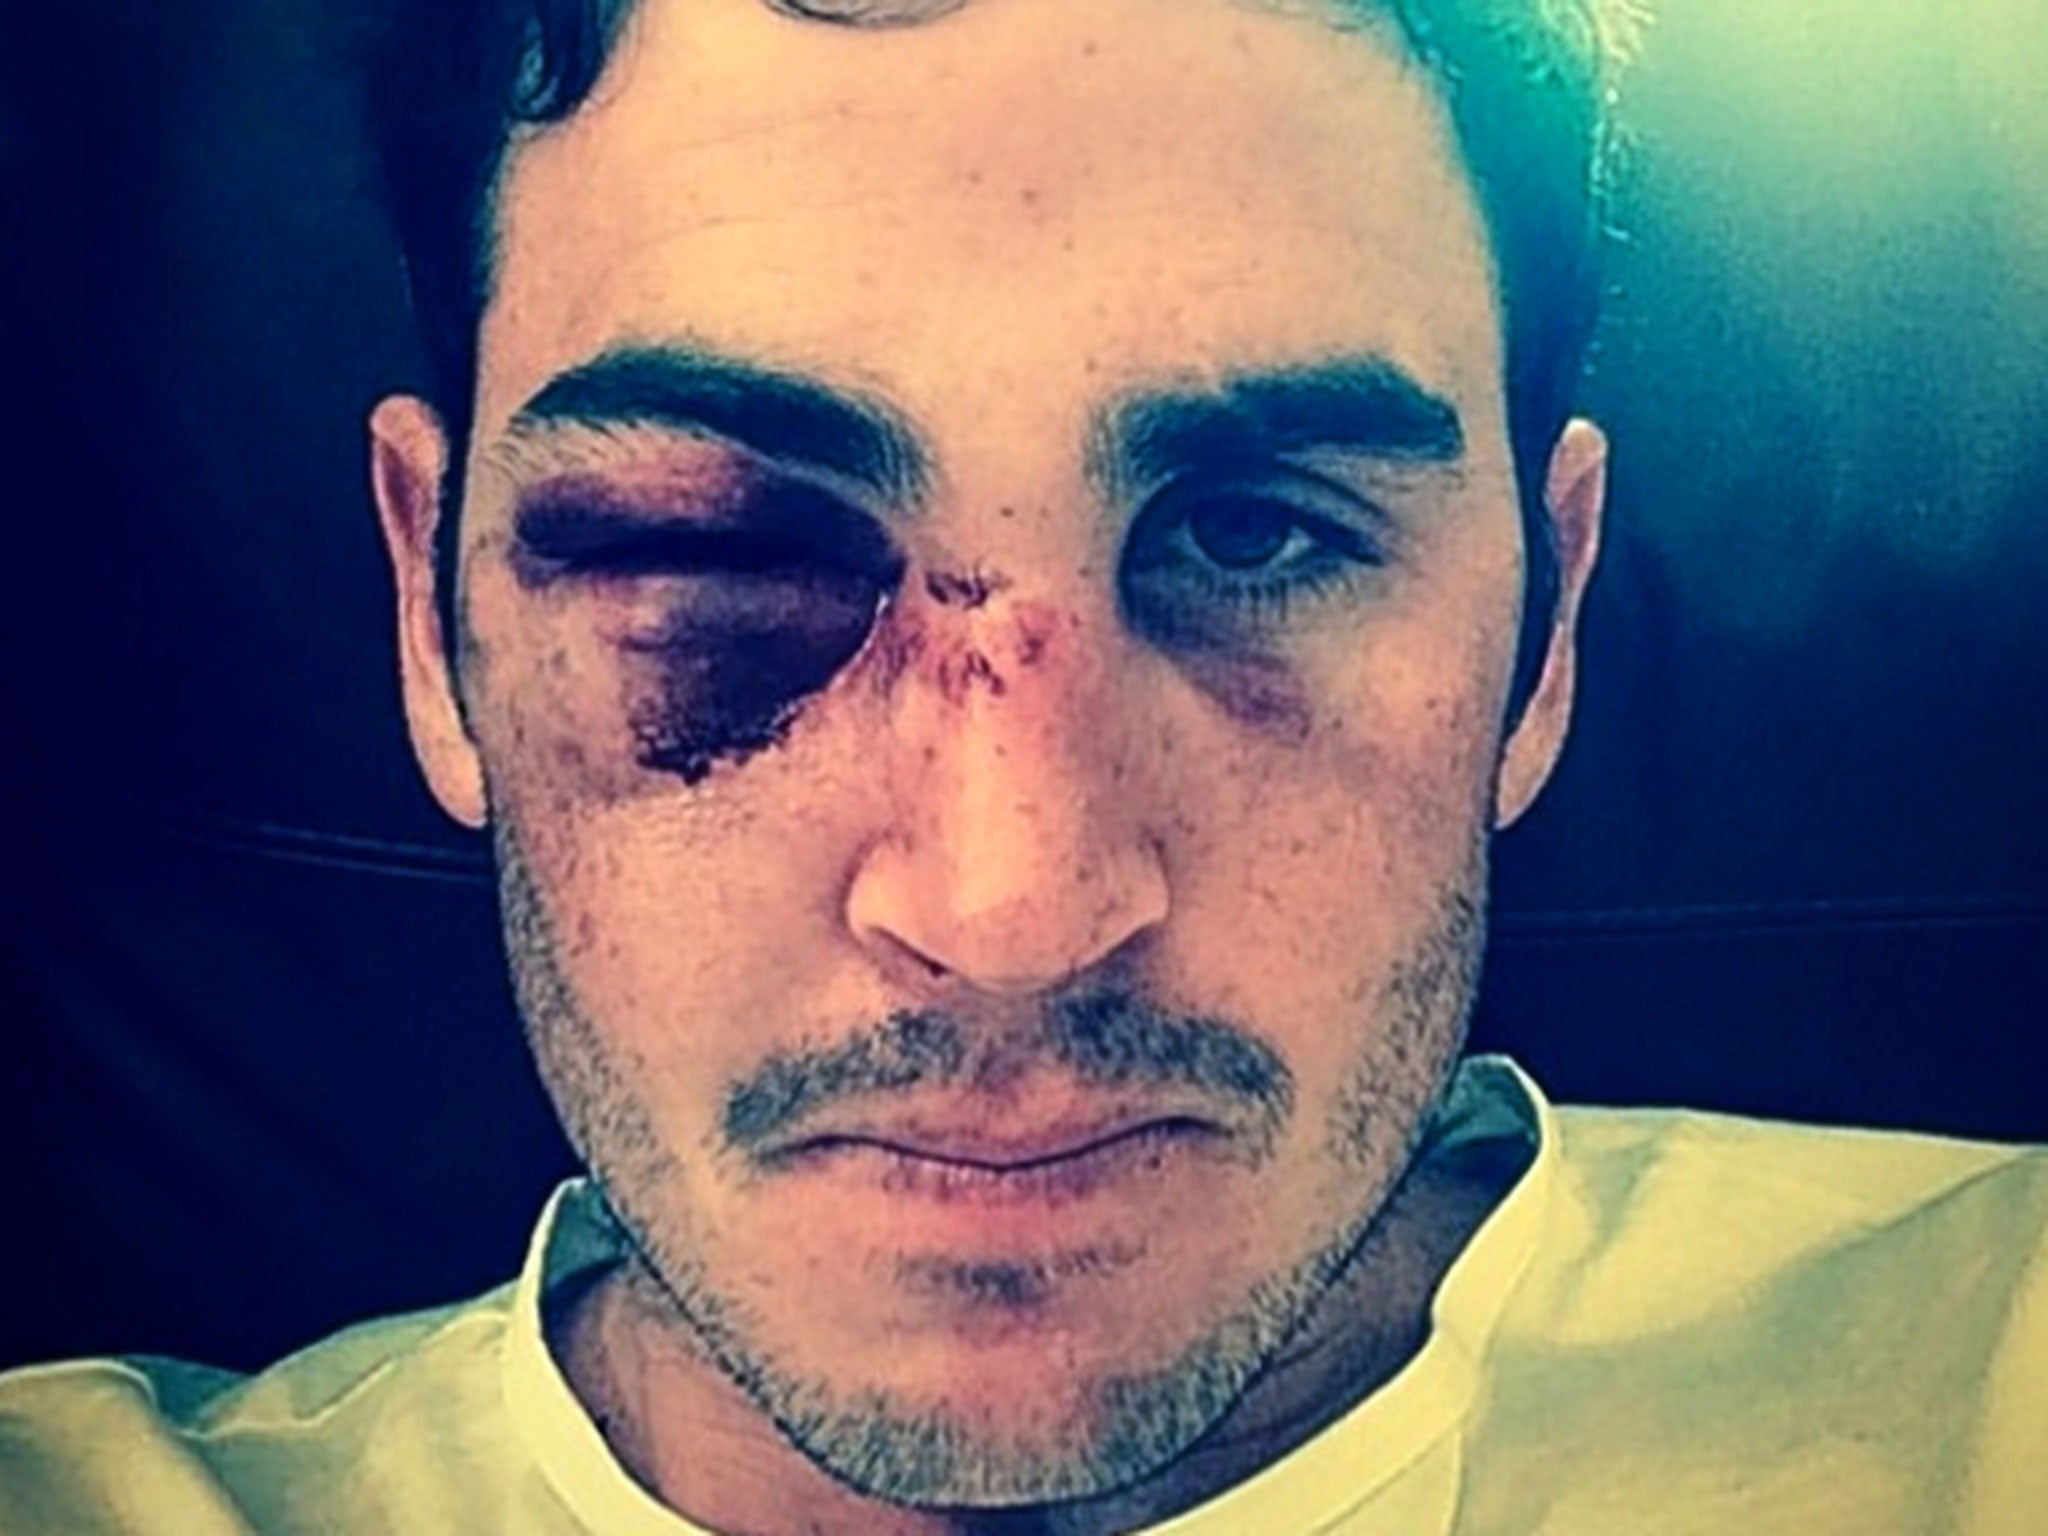 Craig Kieswetter posted this picture of his injury in July